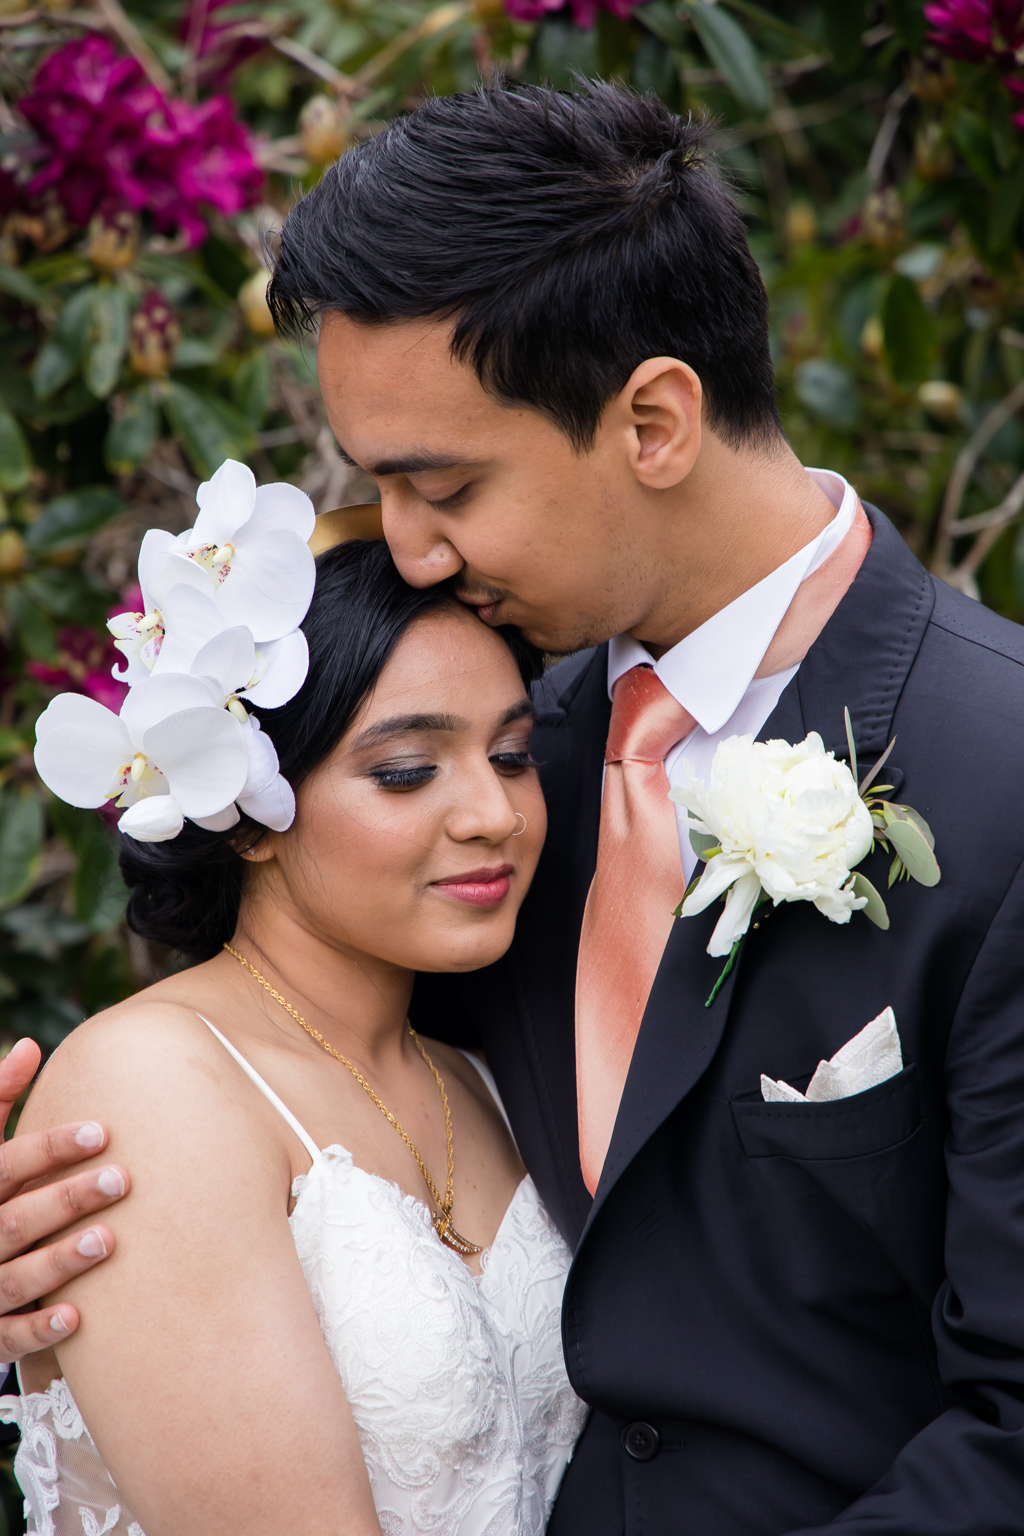 Styled Shoot at Hale Park, captured by Captured by Crissi